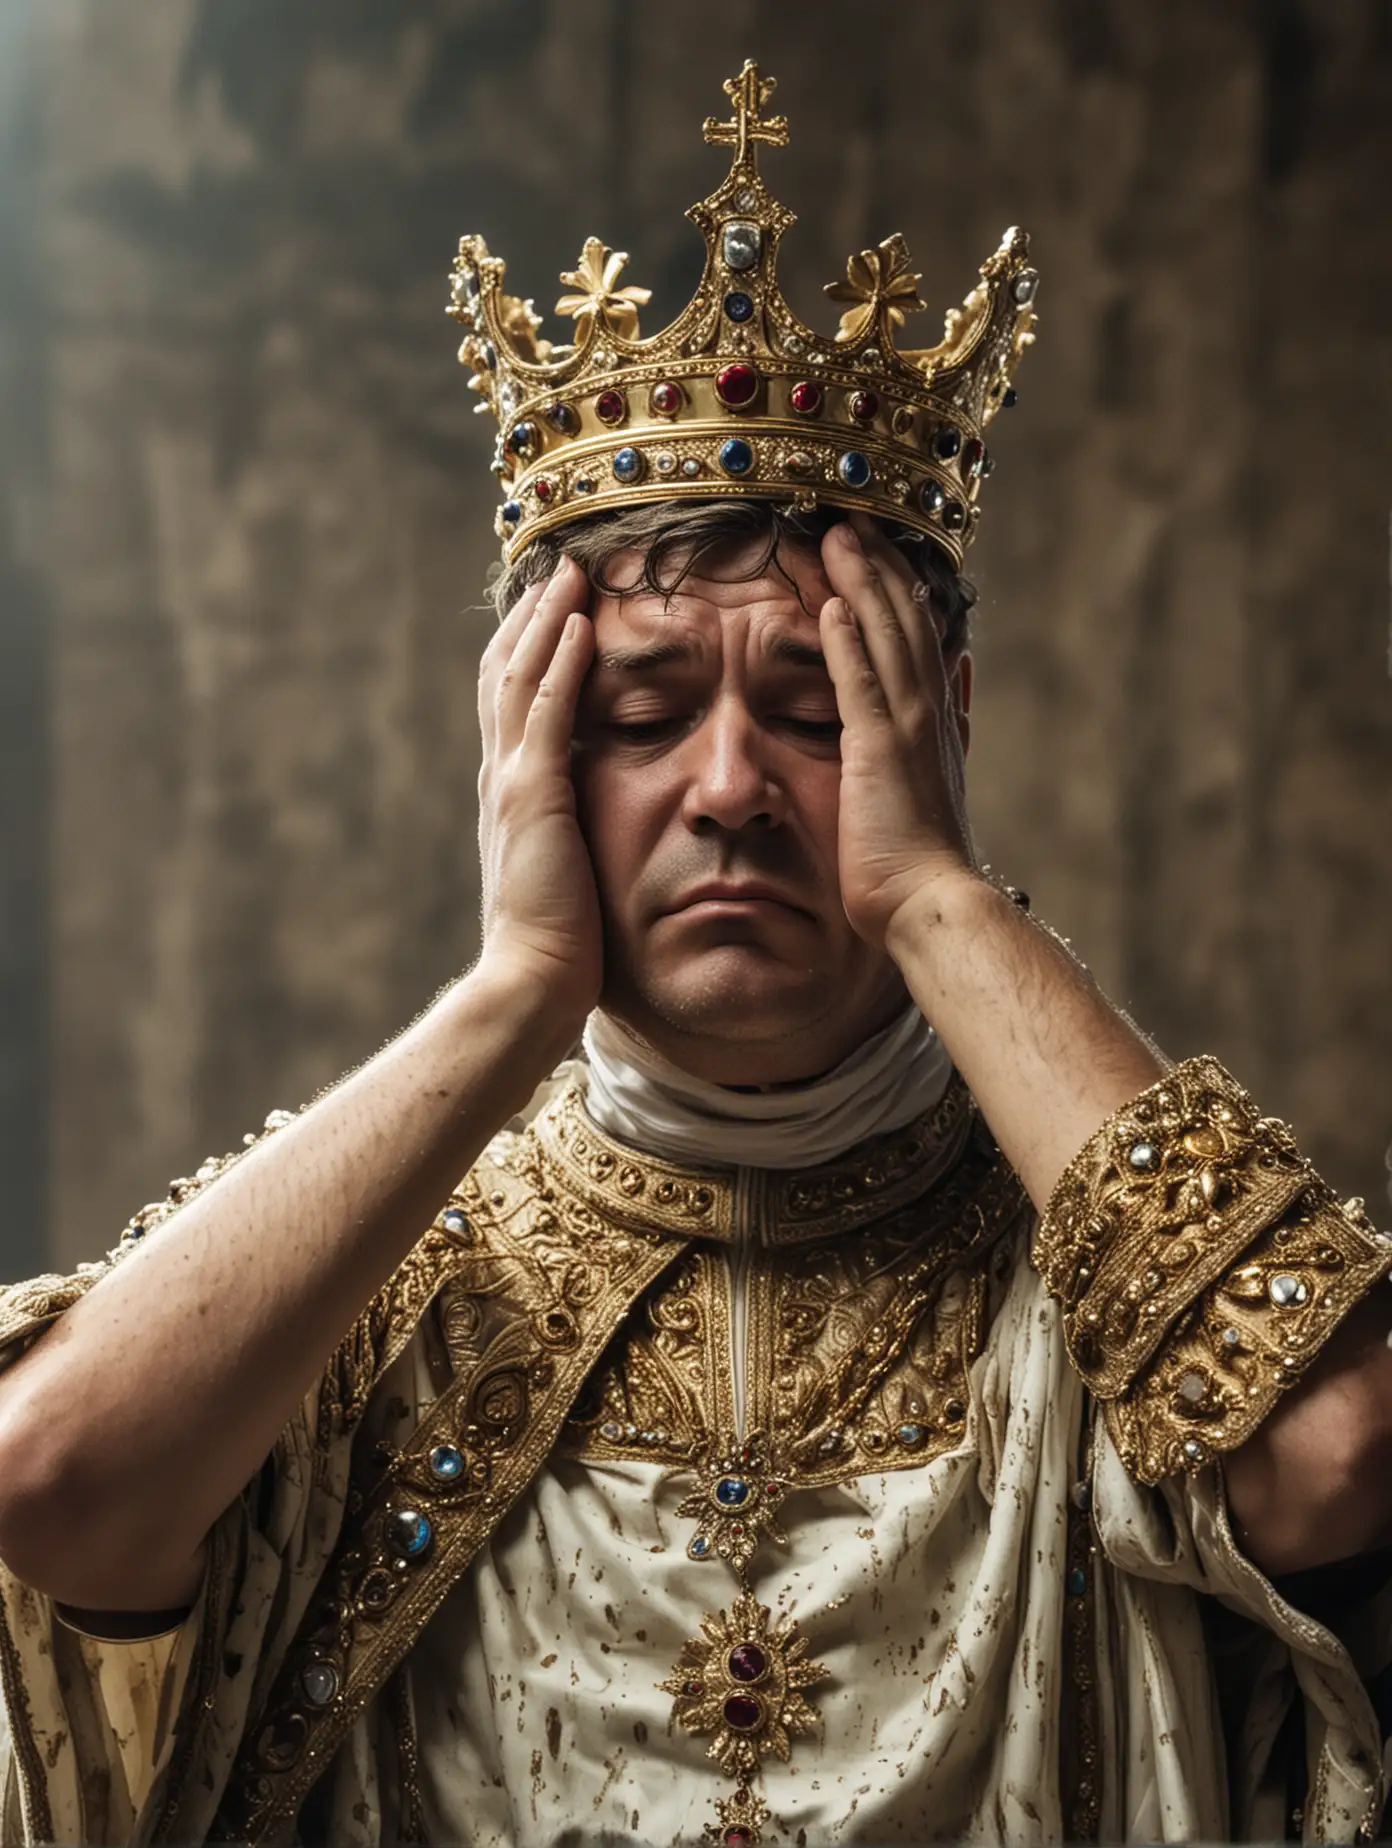 Desperate King Clutching His Head in Grief and Regret